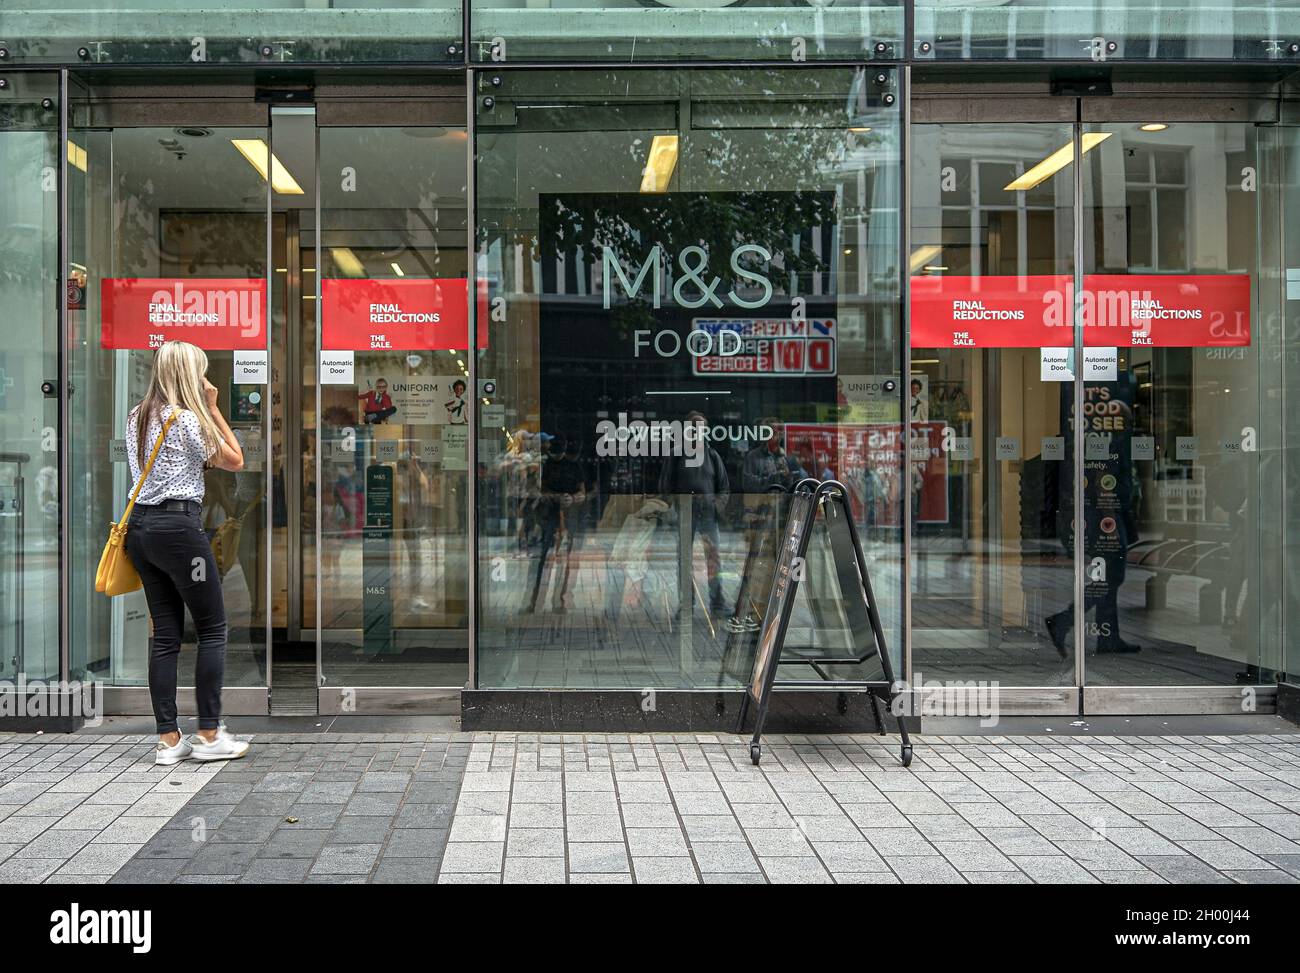 Marks & Spencer Food Hall High Resolution Stock Photography and Images -  Alamy